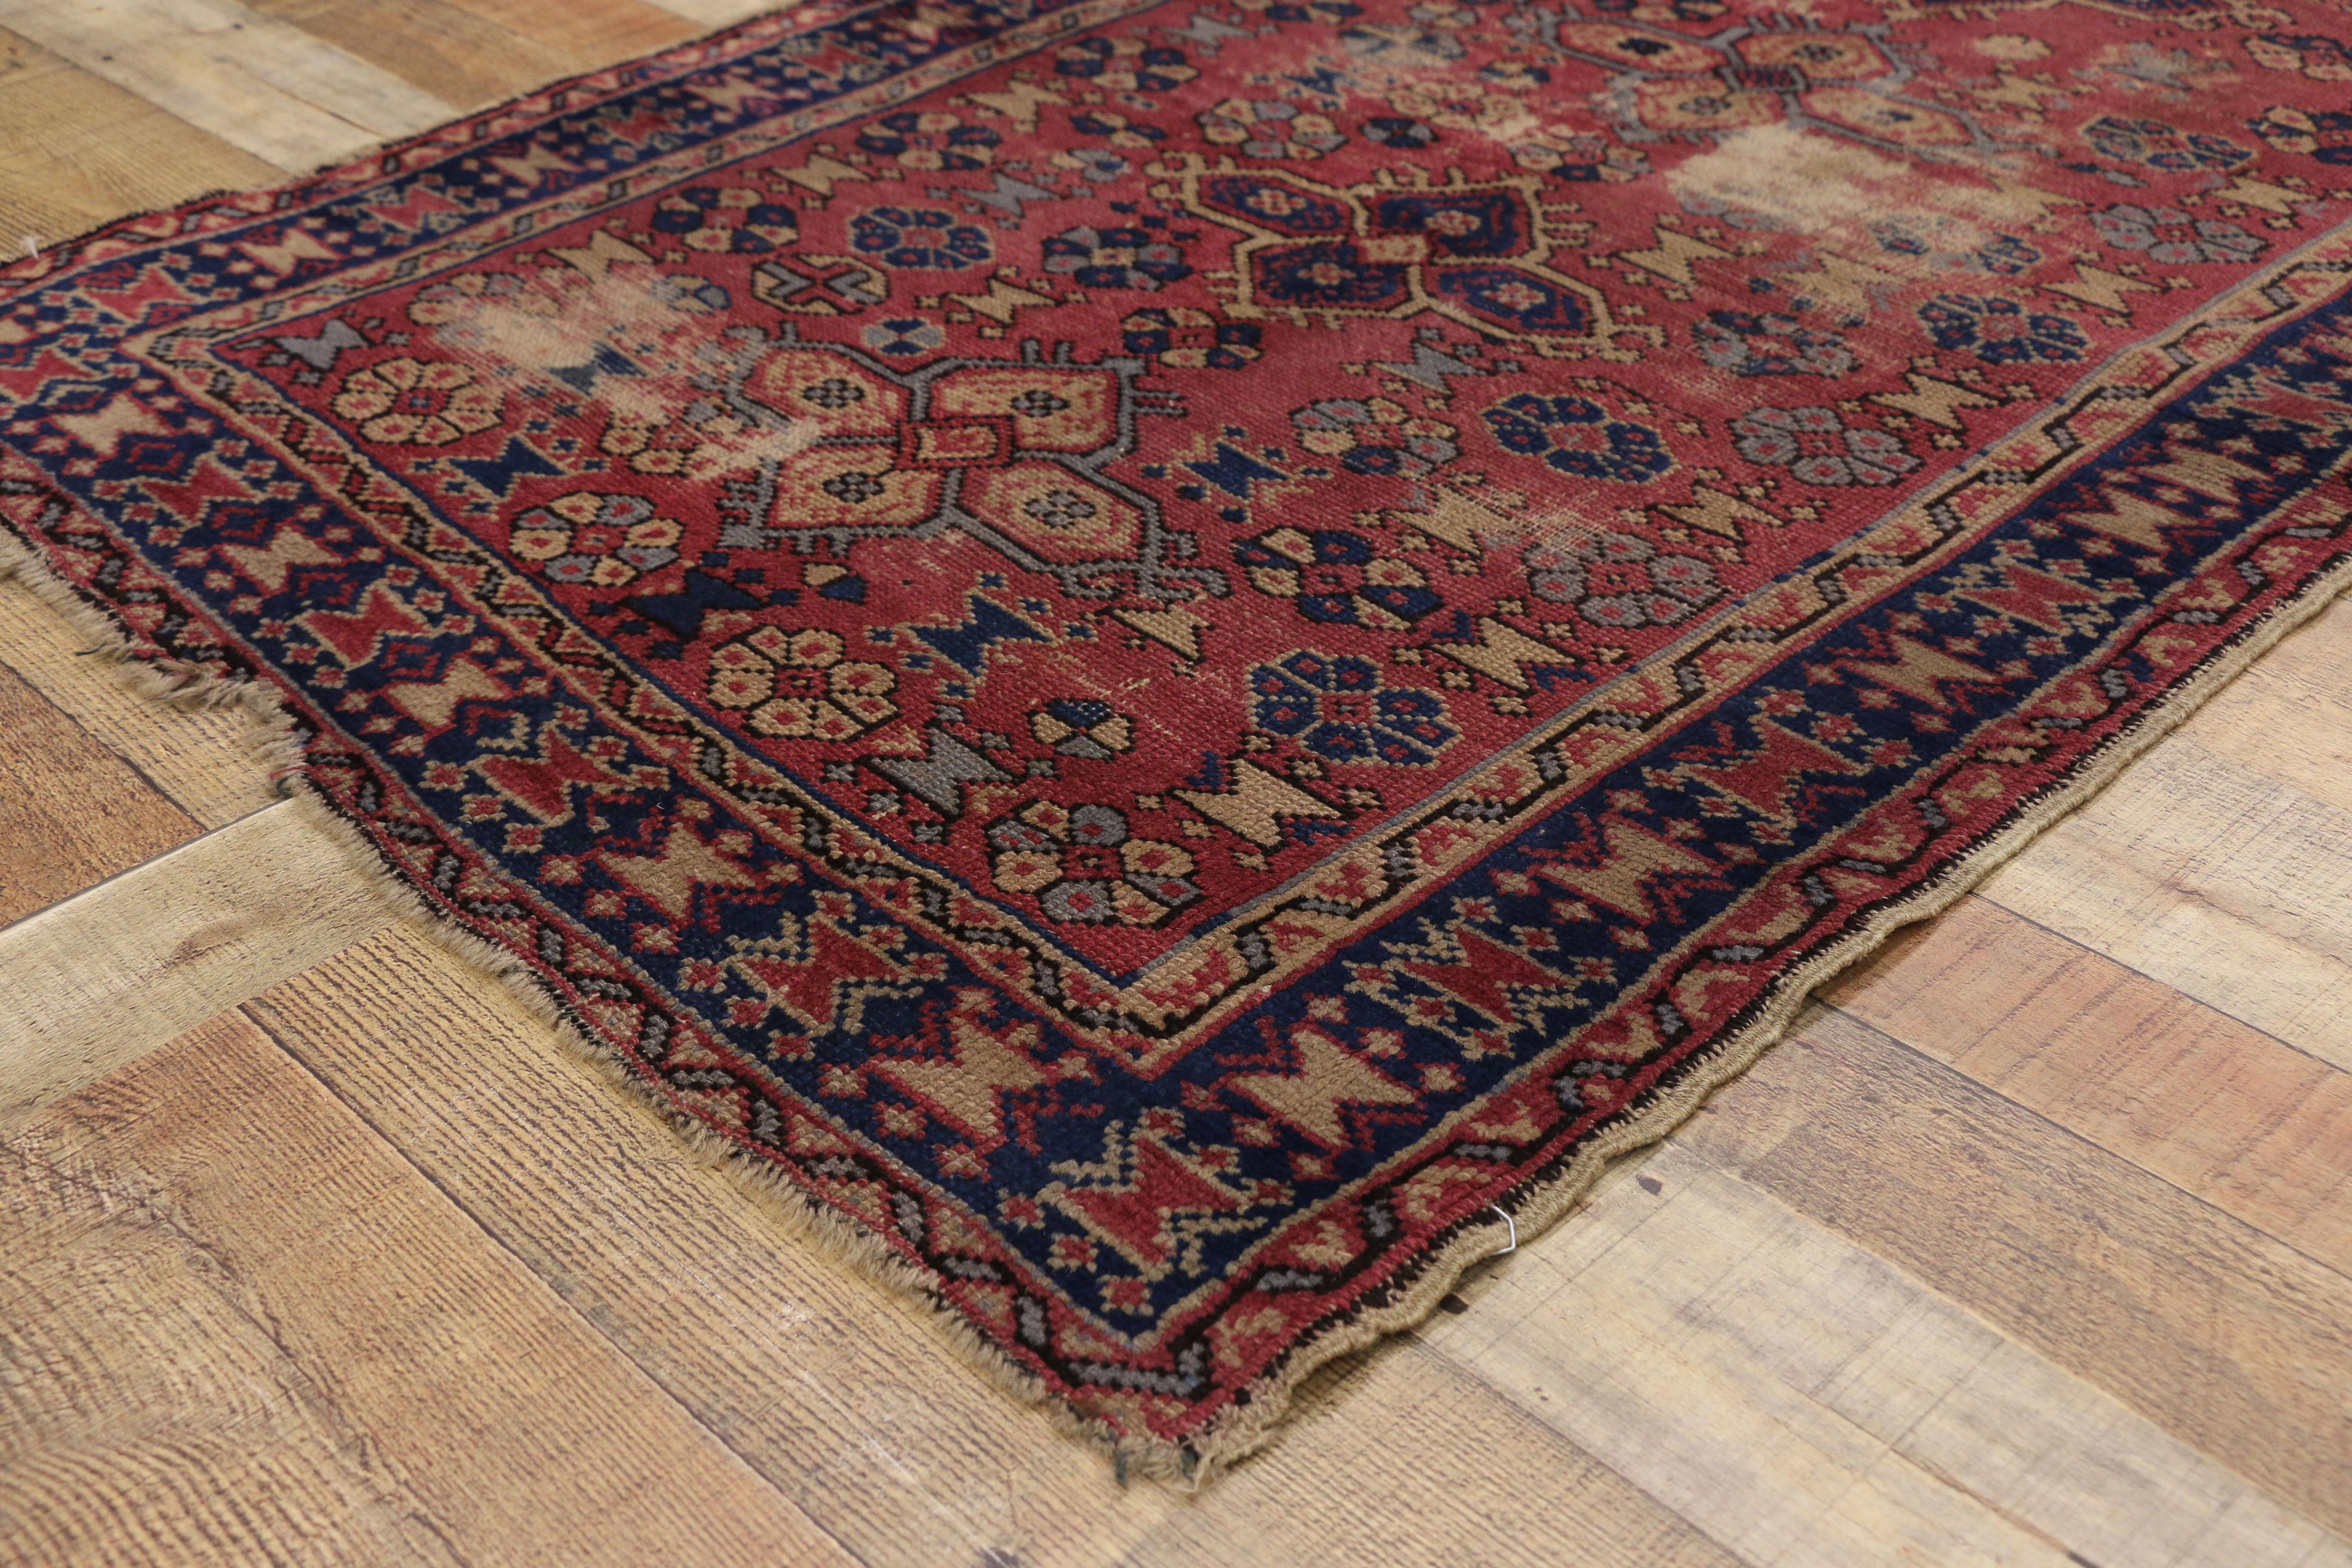 20th Century Distressed Antique Turkish Sparta Rug with Industrial Rustic Artisan Style